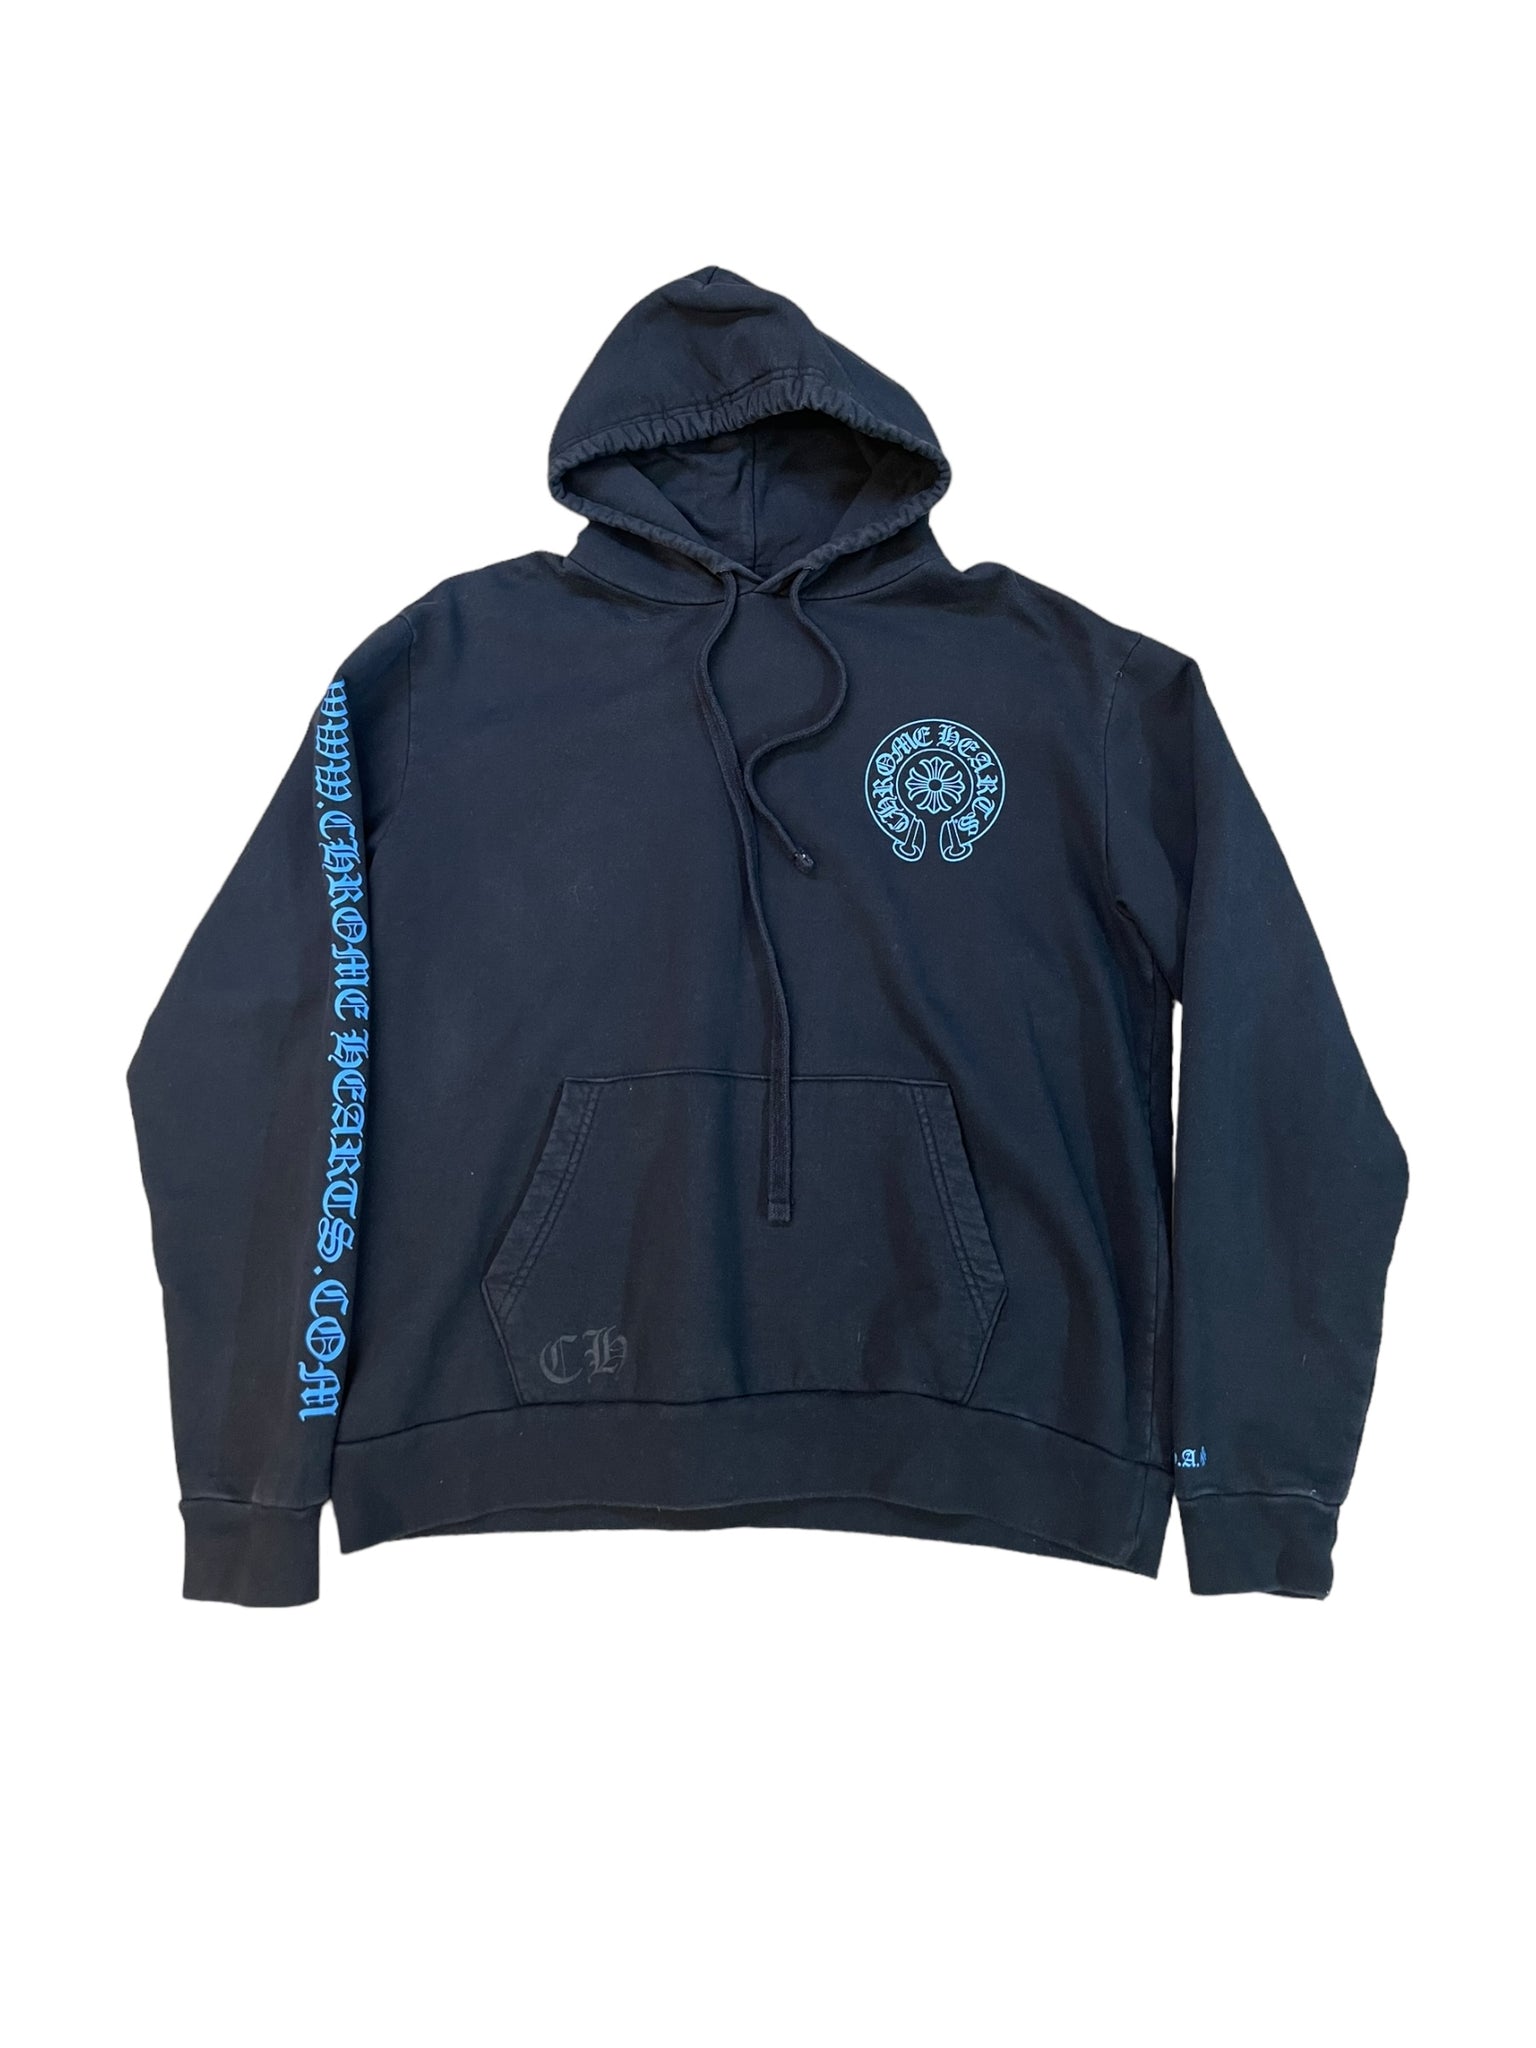 Chrome Hearts Online Hoodie "Blue" (Pre-Owned)